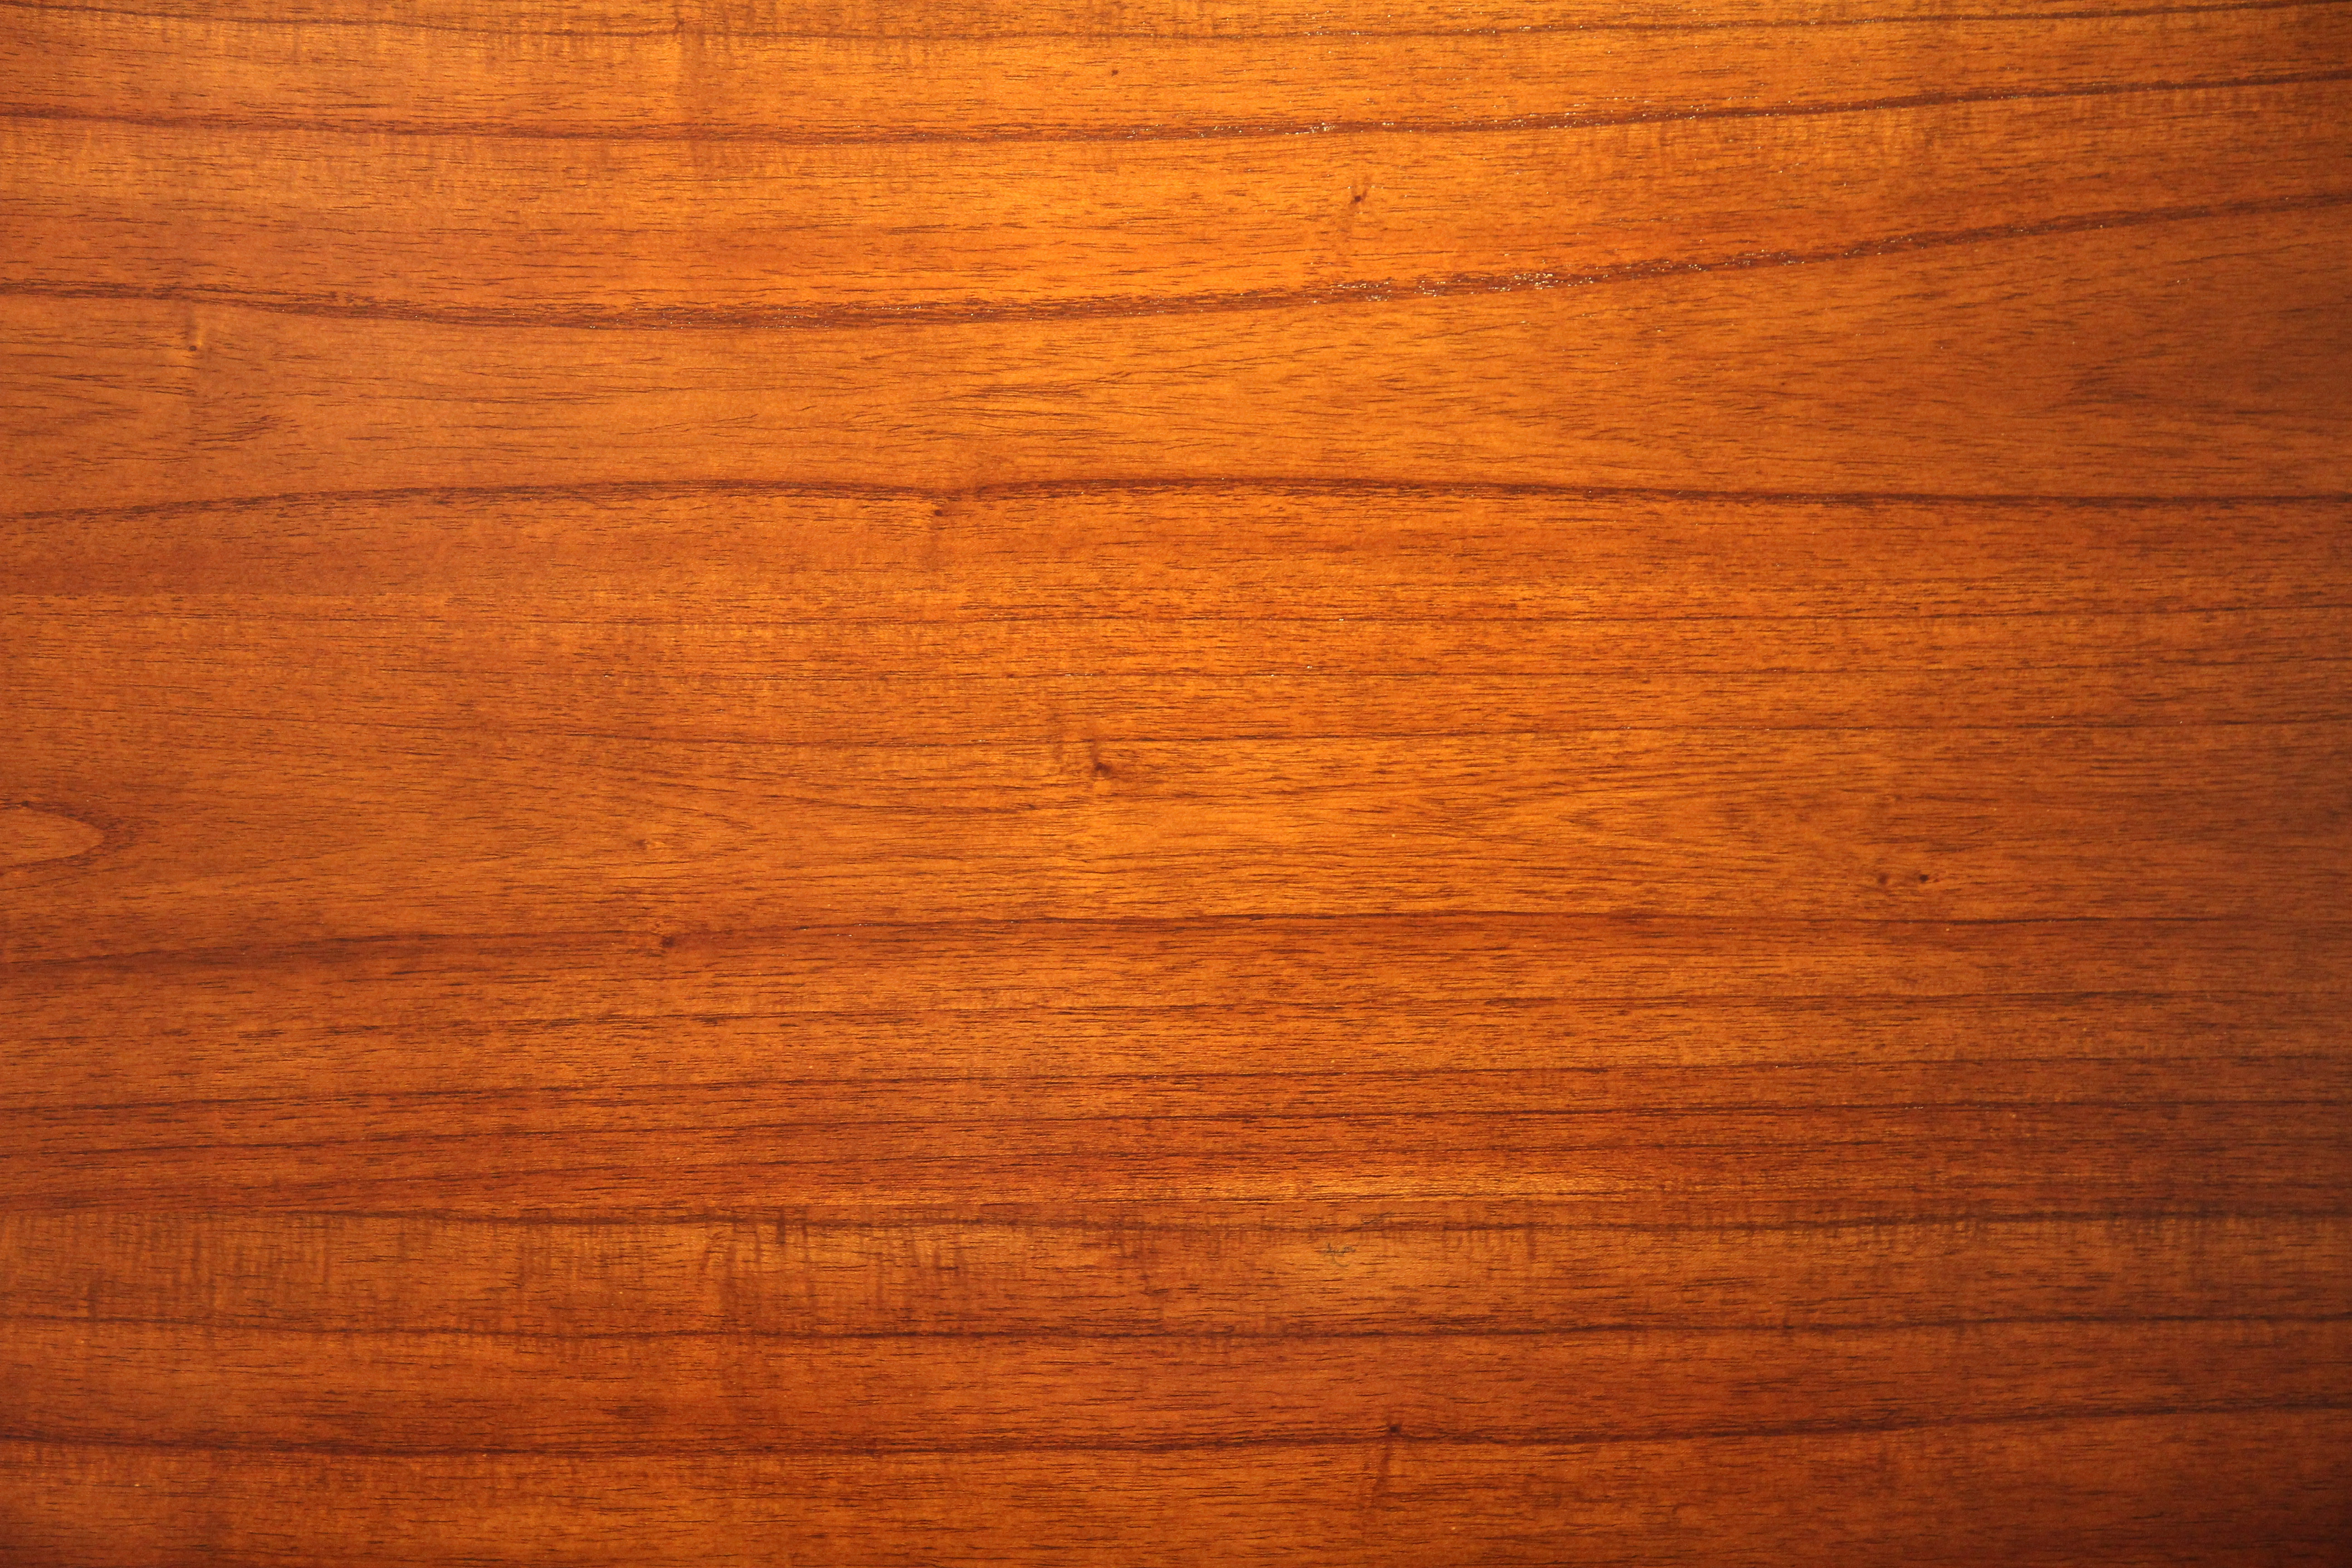  red wood texture grain natural wooden paneling surface photo wallpaper